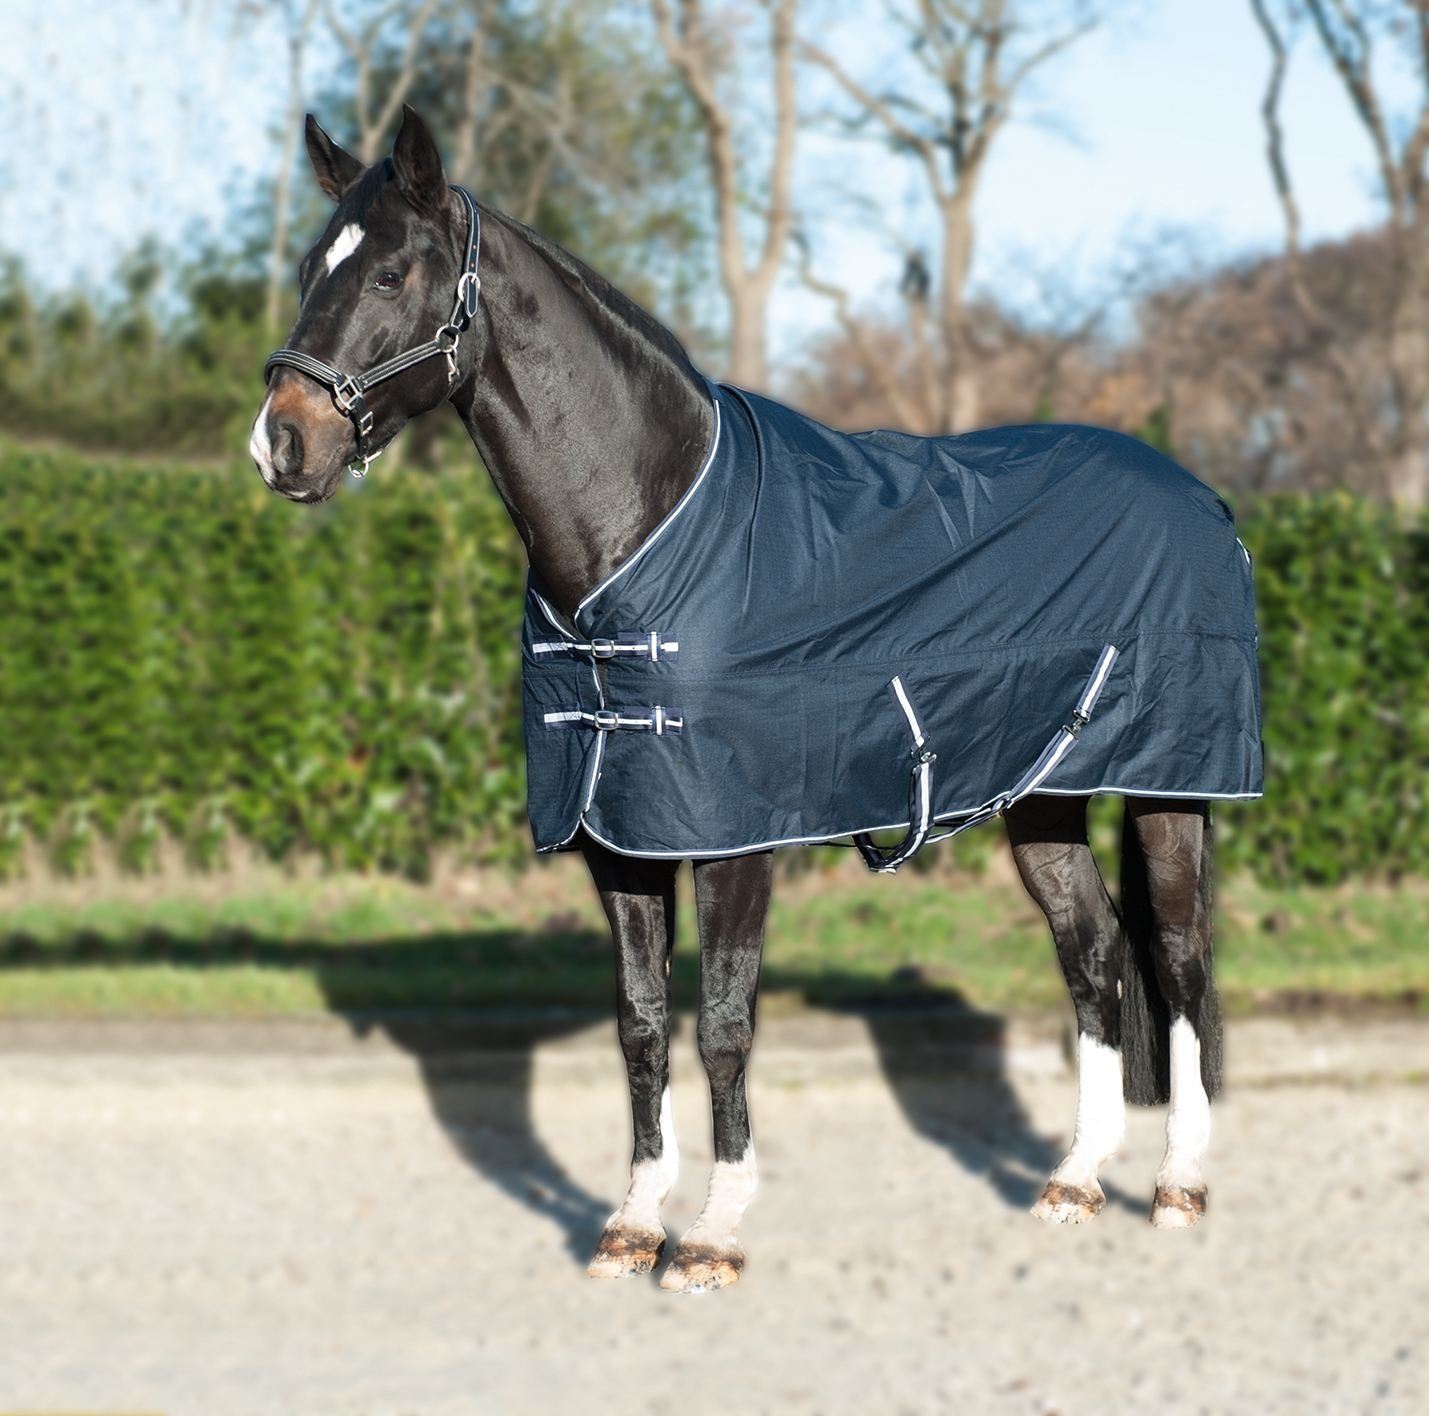 Hkm Turnout Rug Economic With Fleece